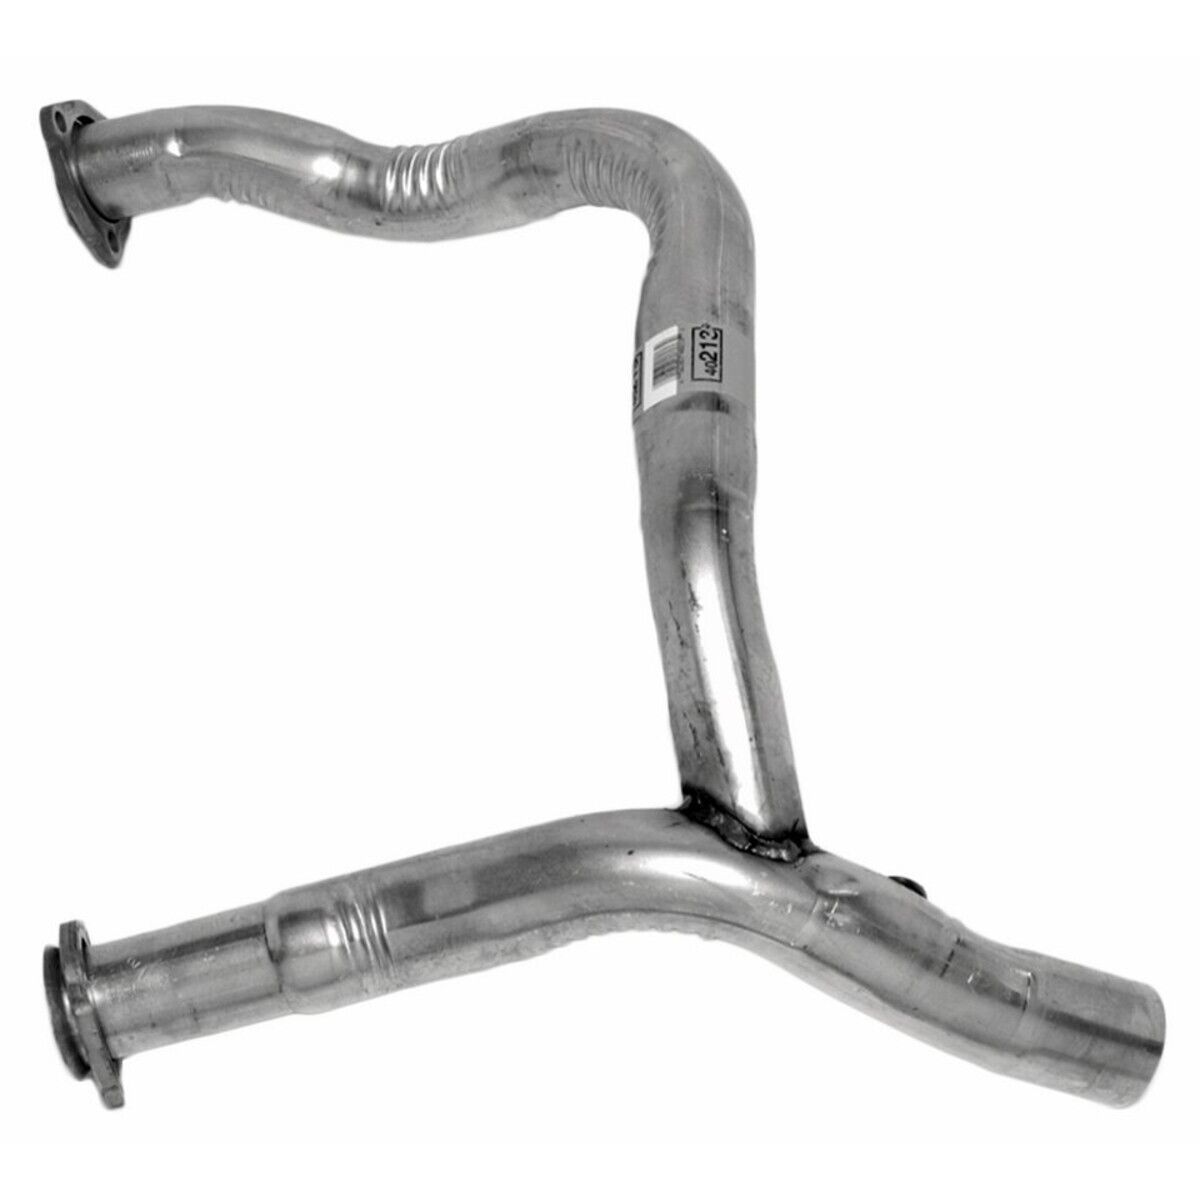 40213 Walker Exhaust Pipe for Chevy S10 Pickup S15 Chevrolet S-10 GMC Sonoma 92